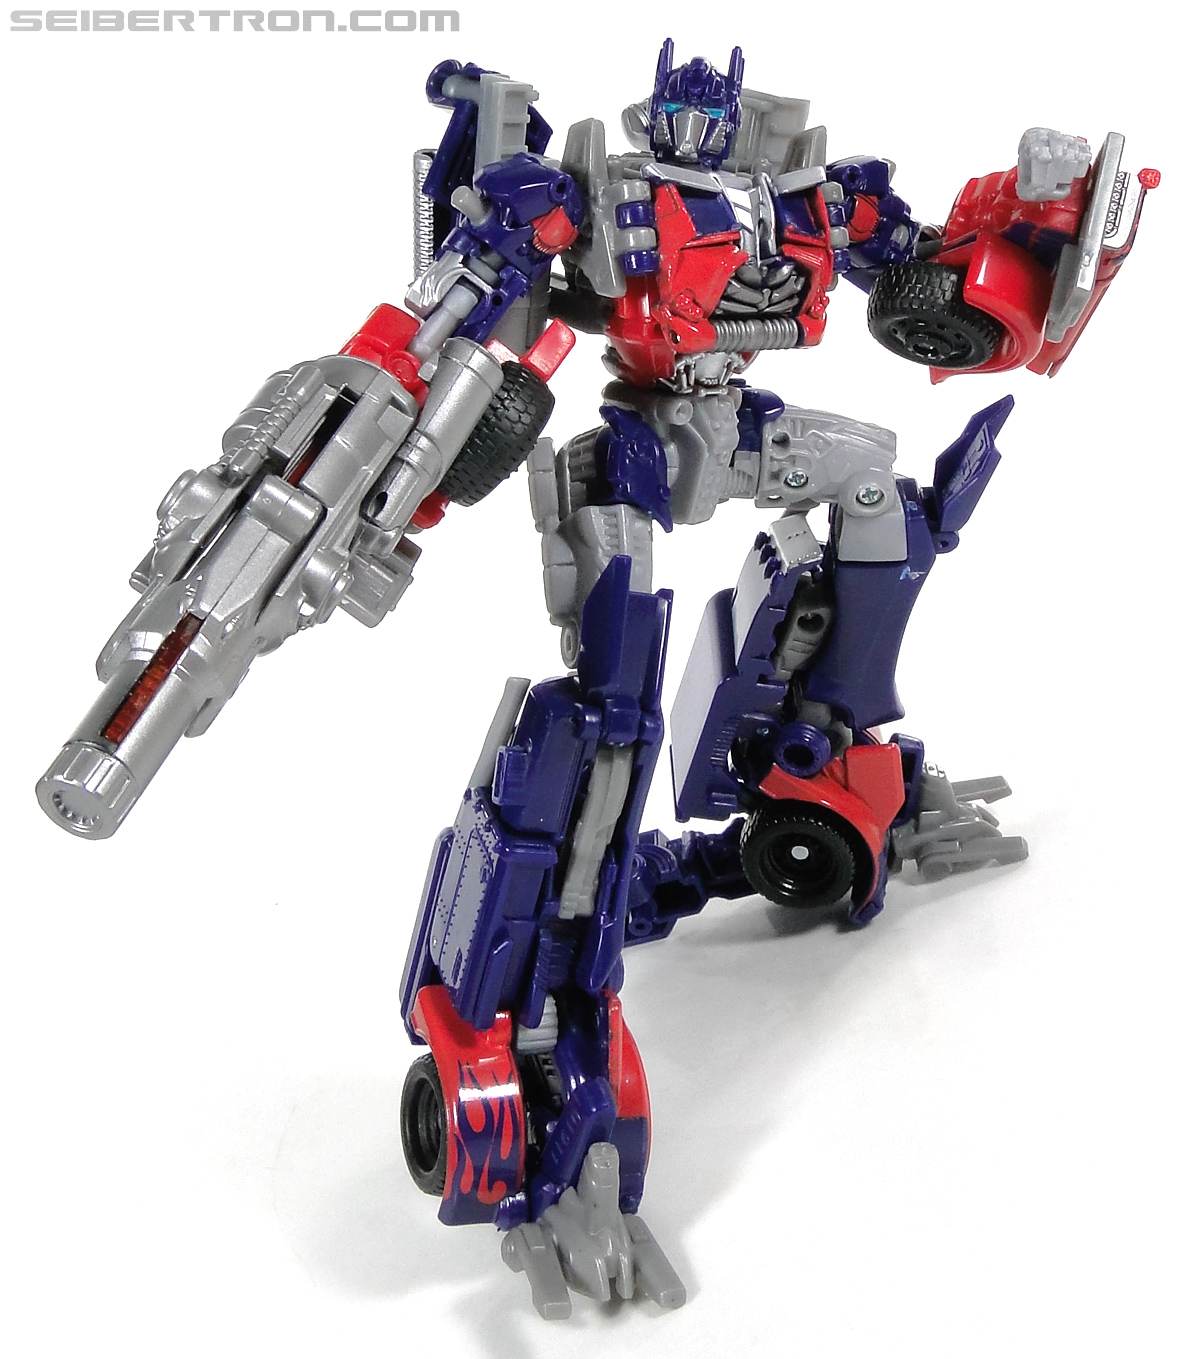 Transformers Dark of the Moon Optimus Prime with Mechtech Trailer (Image #169 of 248)